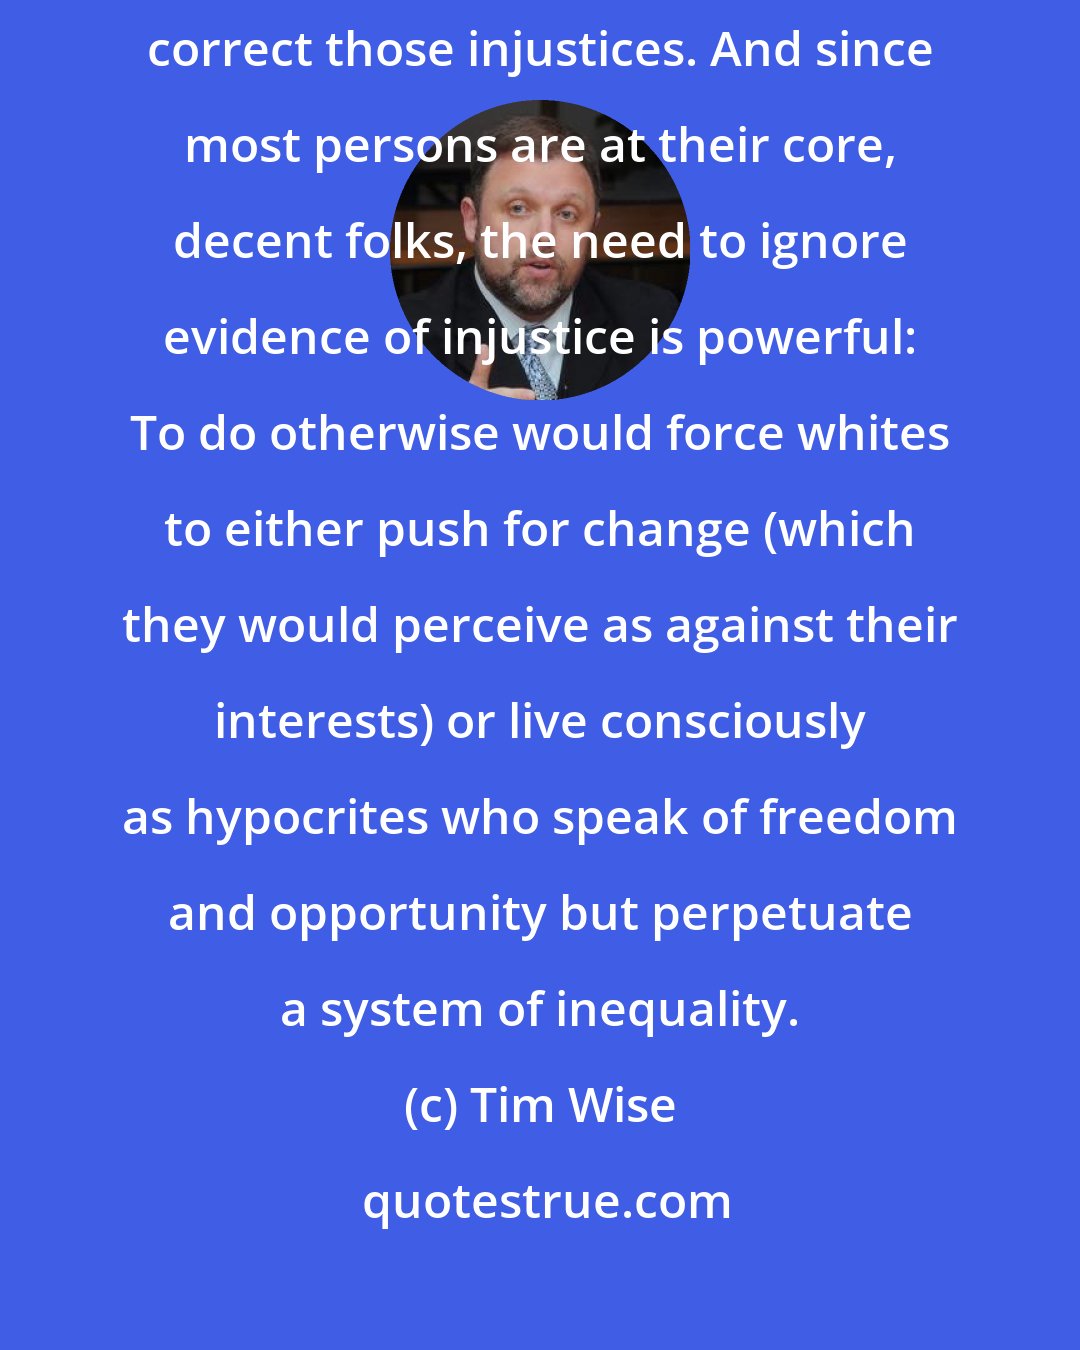 Tim Wise: After all, acknowledging unfairness then calls decent people forth to correct those injustices. And since most persons are at their core, decent folks, the need to ignore evidence of injustice is powerful: To do otherwise would force whites to either push for change (which they would perceive as against their interests) or live consciously as hypocrites who speak of freedom and opportunity but perpetuate a system of inequality.